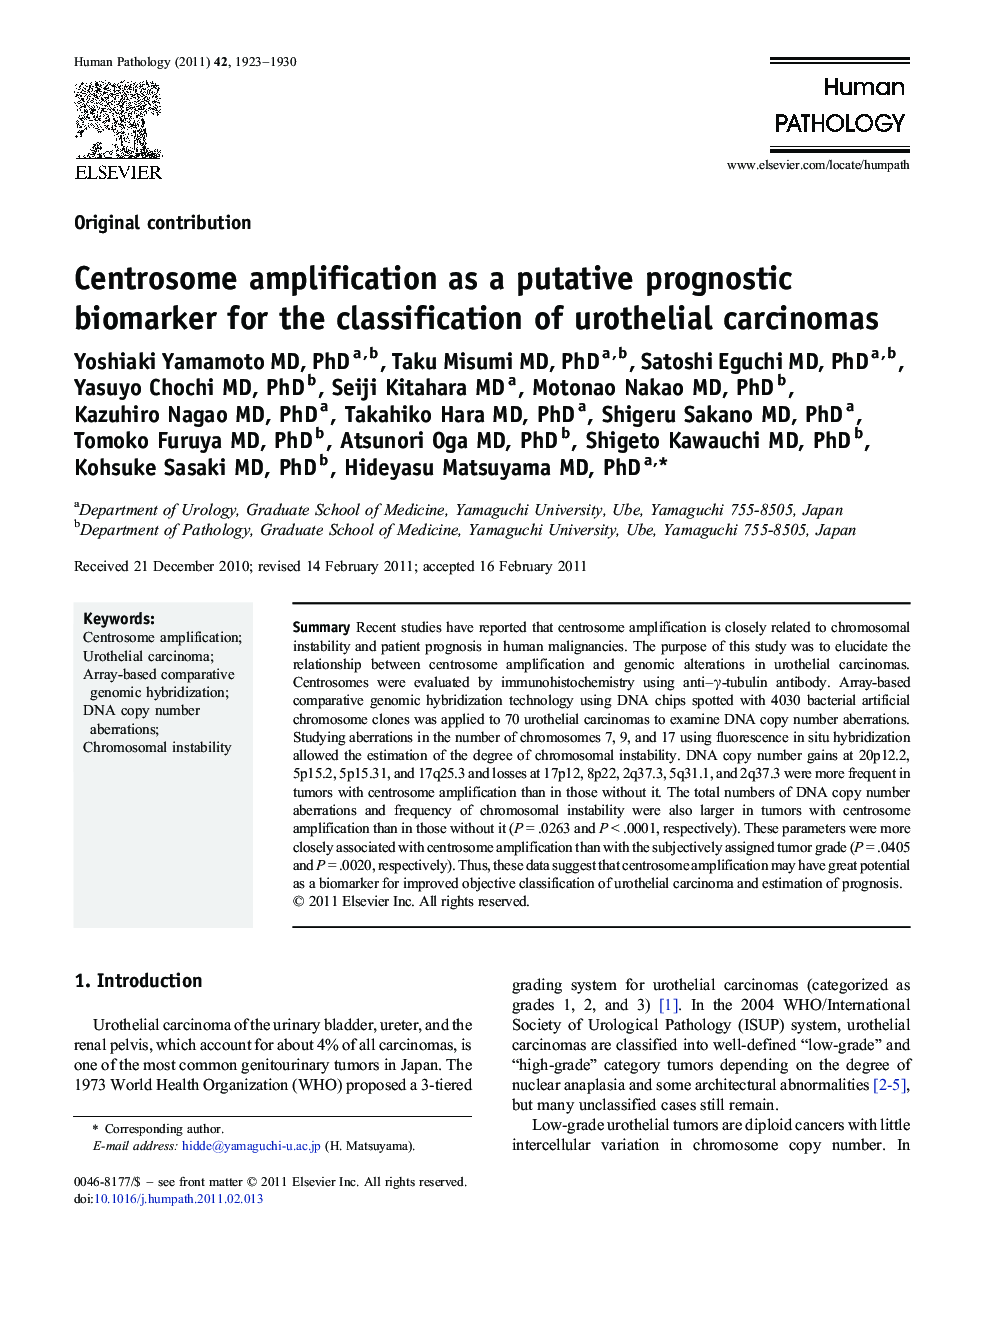 Centrosome amplification as a putative prognostic biomarker for the classification of urothelial carcinomas